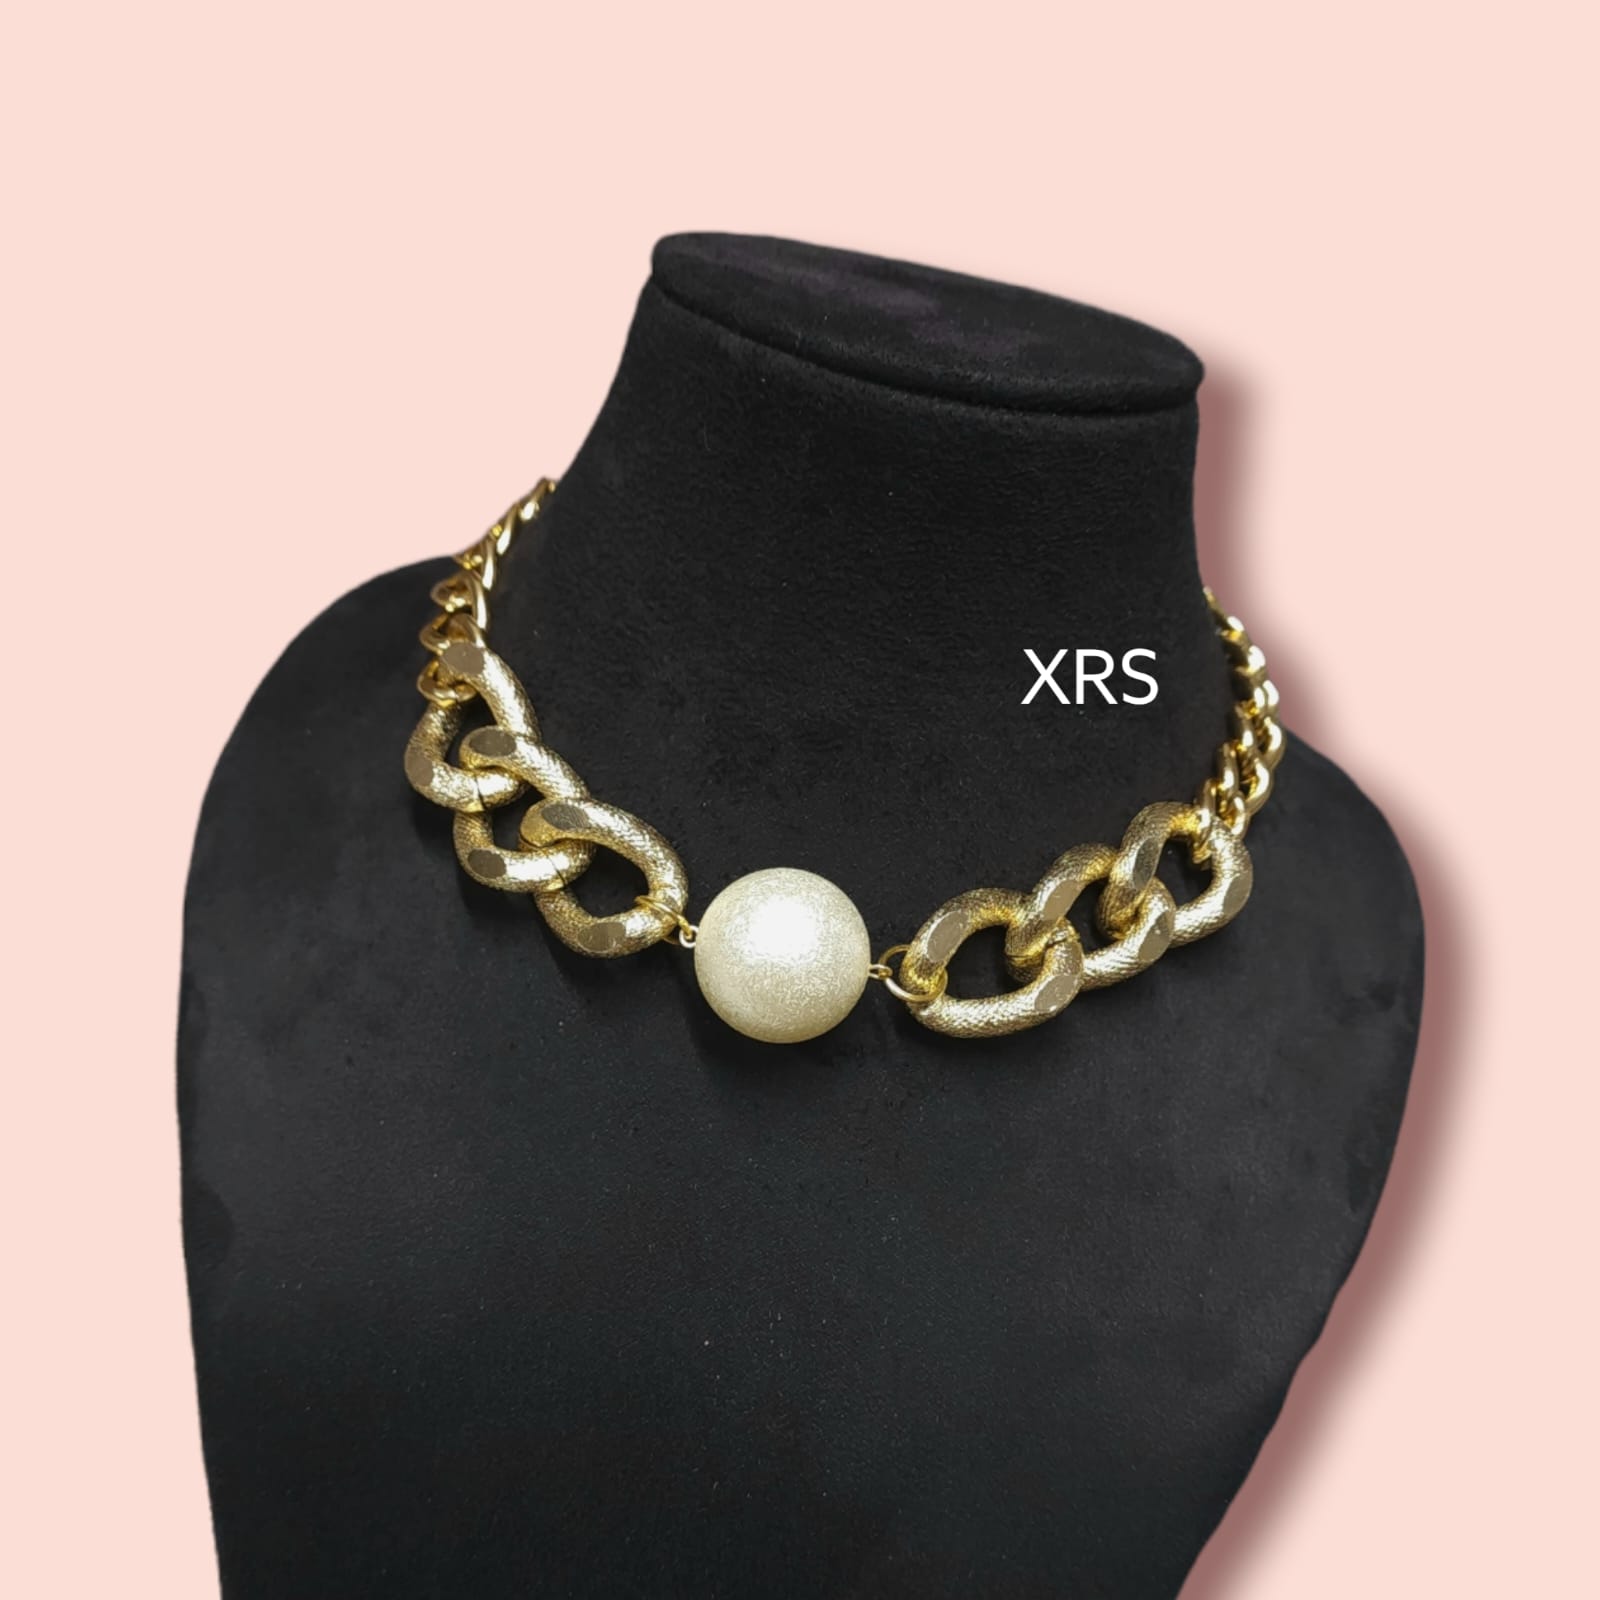 P.S.- I made this chunky pearl necklace with FASHIONISTA.COM - YouTube